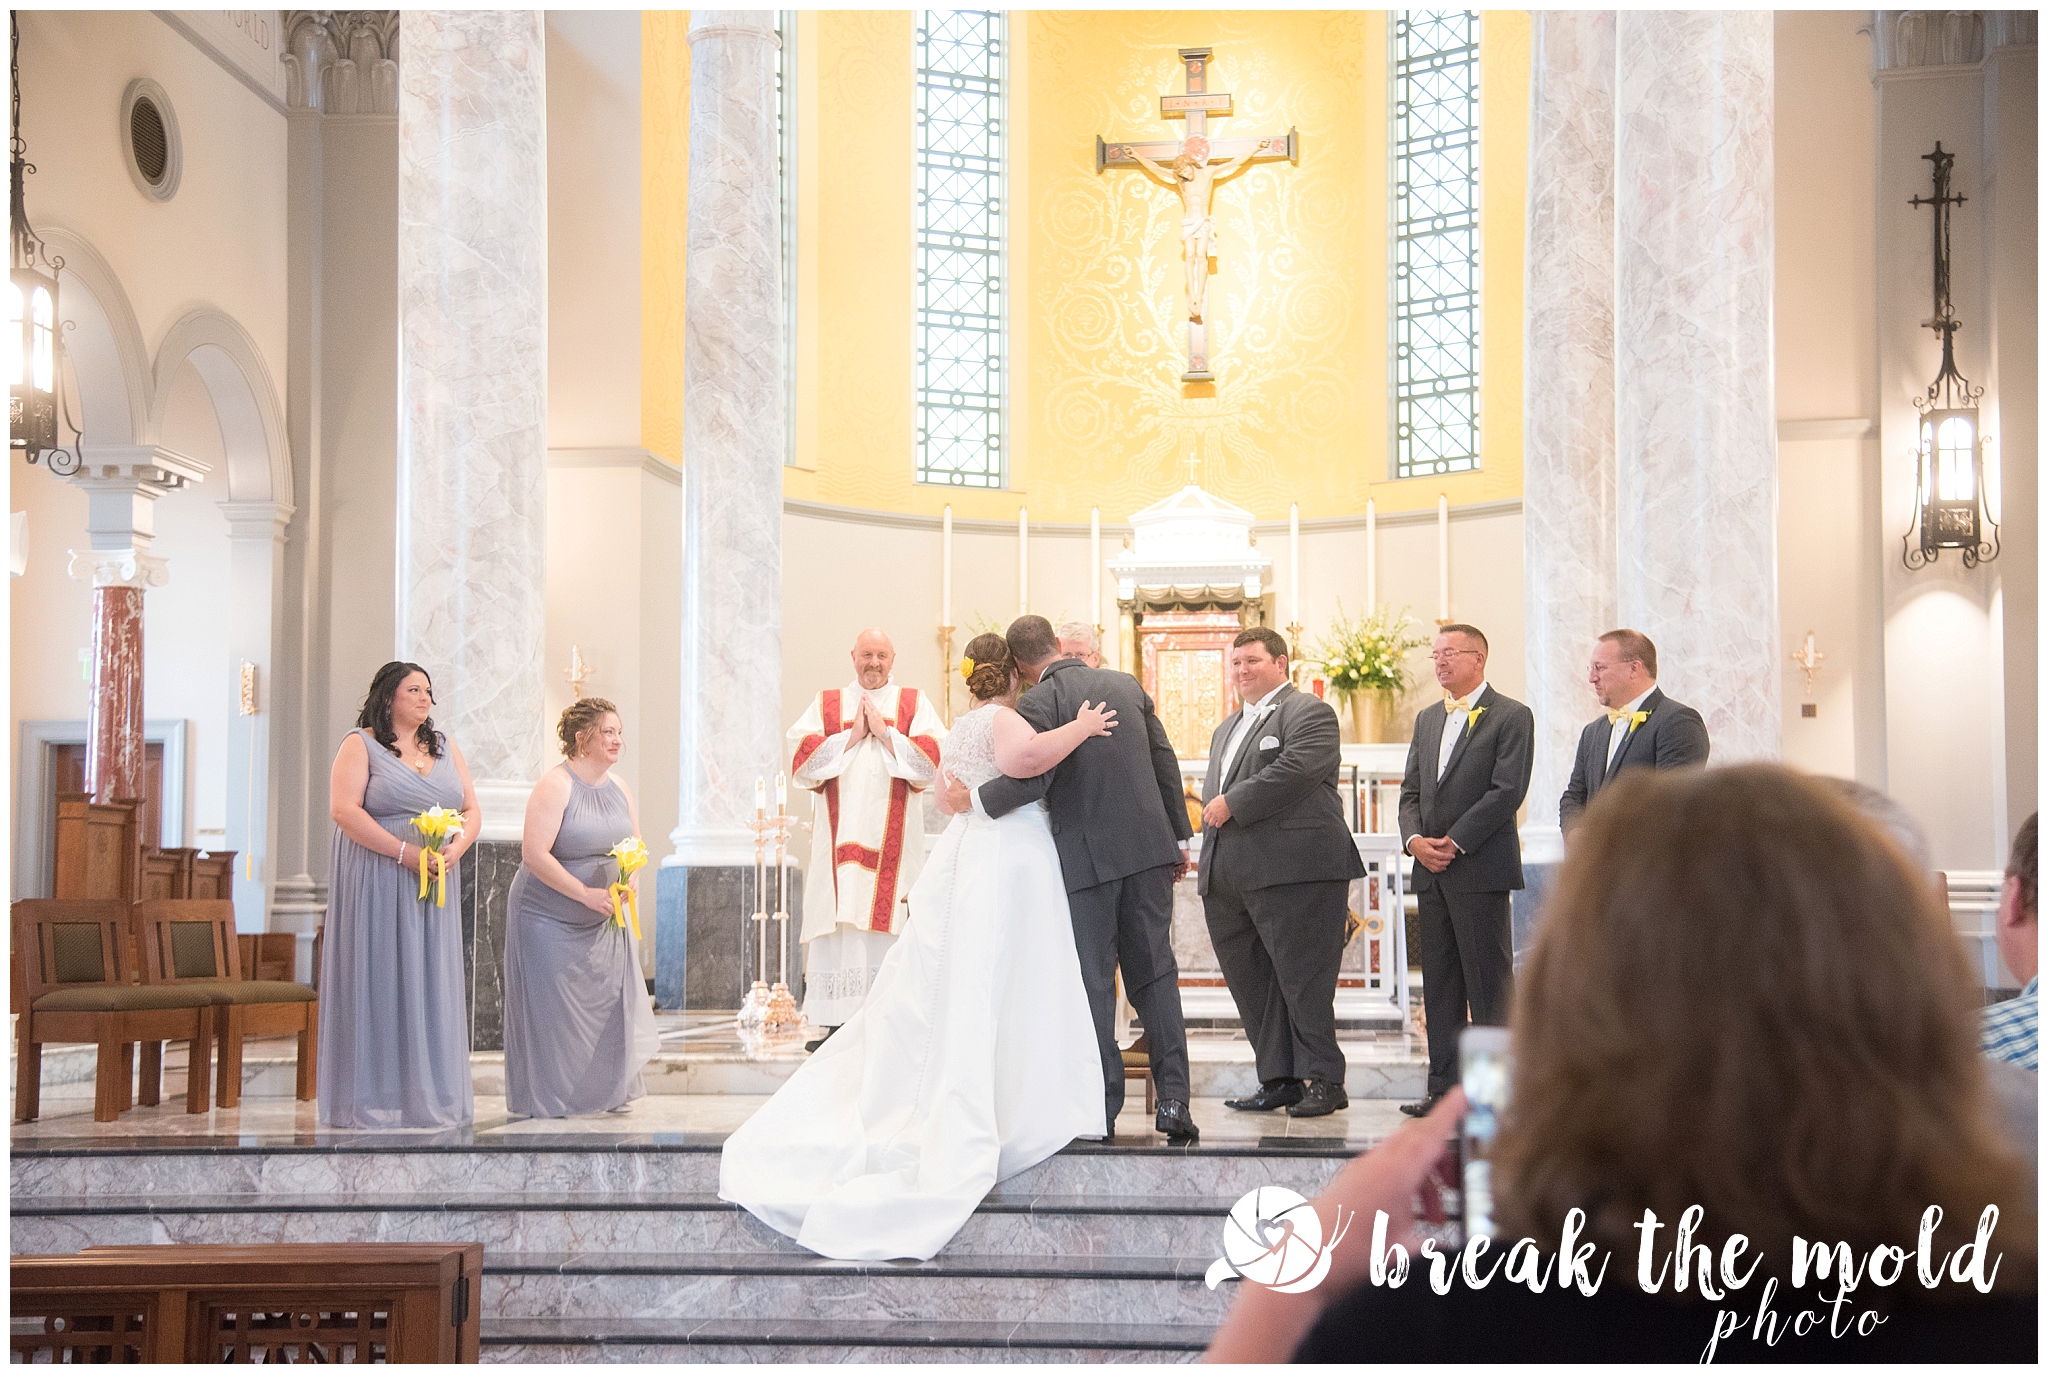 wedding-knoxville-sacred-heart-cathedral-photographer-break-the-mold-photo-feature-affordable_0787.jpg